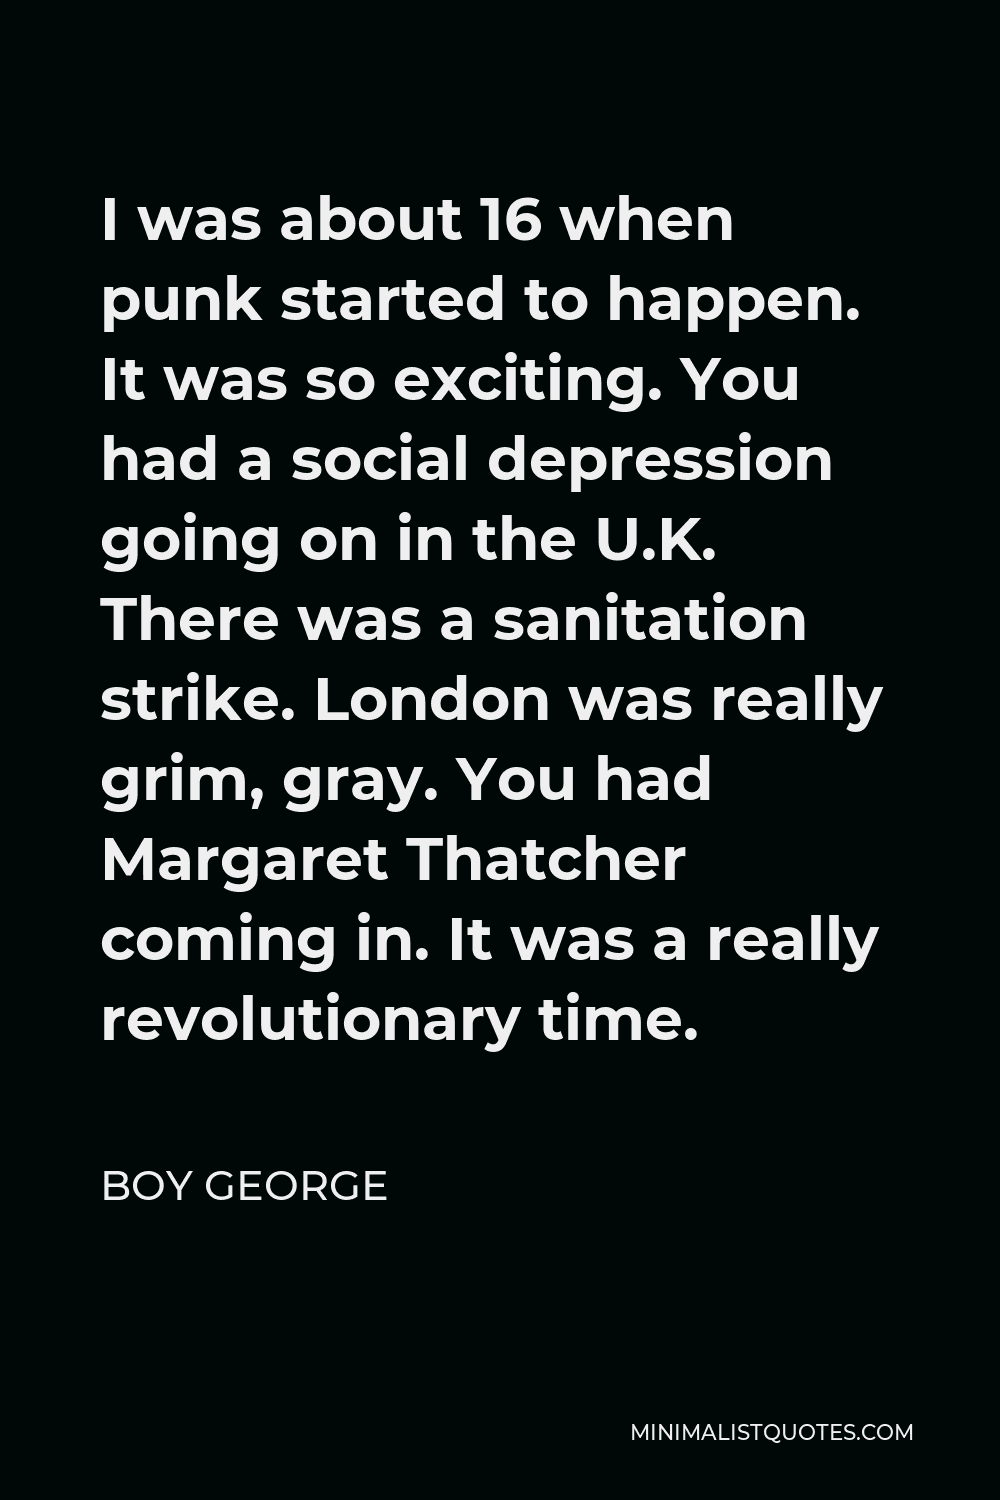 Boy George Quote - I was about 16 when punk started to happen. It was so exciting. You had a social depression going on in the U.K. There was a sanitation strike. London was really grim, gray. You had Margaret Thatcher coming in. It was a really revolutionary time.